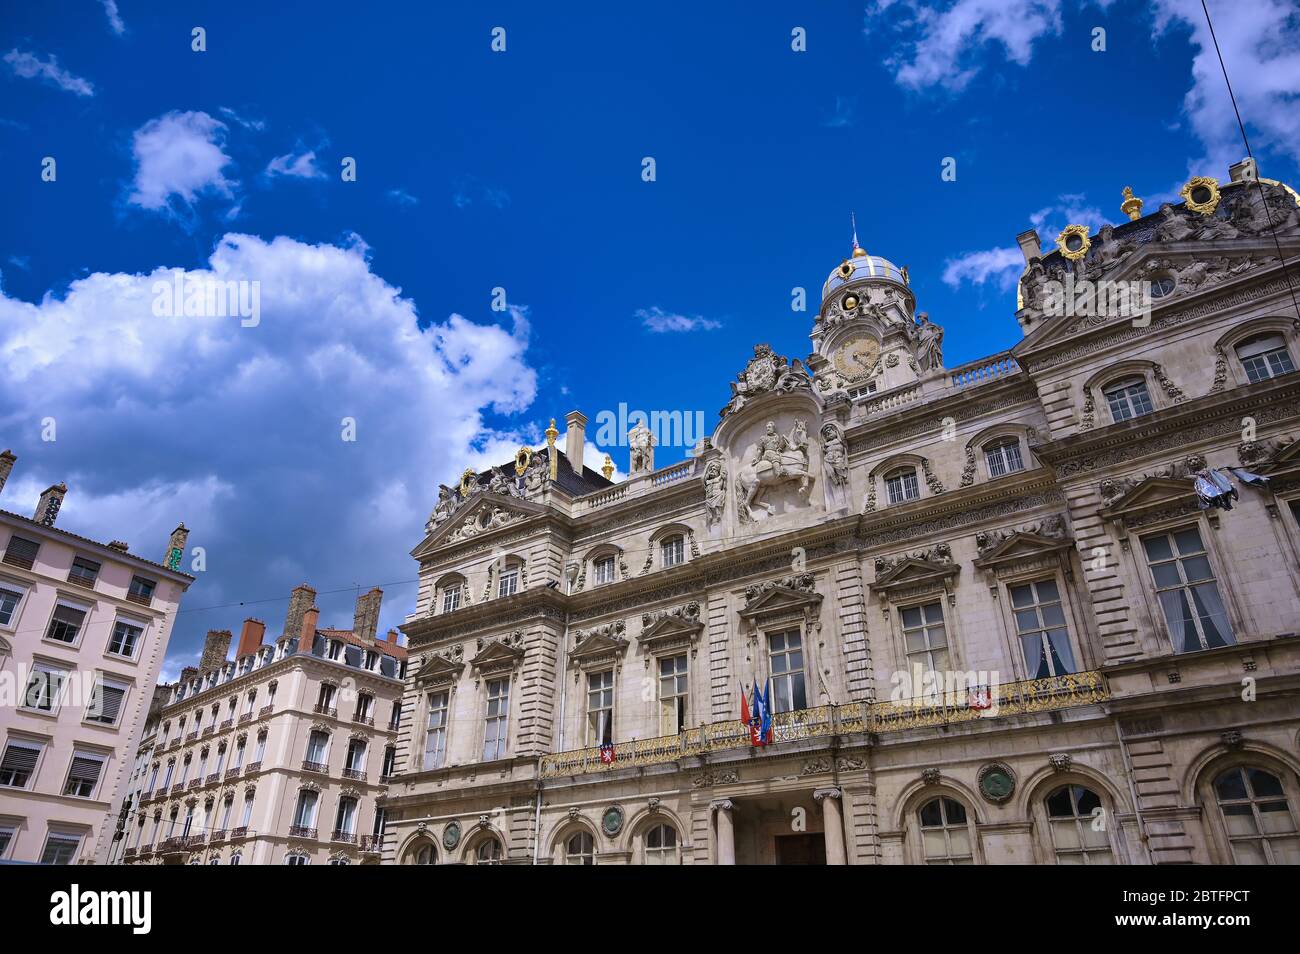 The Hotel de Ville, the city hall of Lyon, France, on a sunny day. Stock Photo